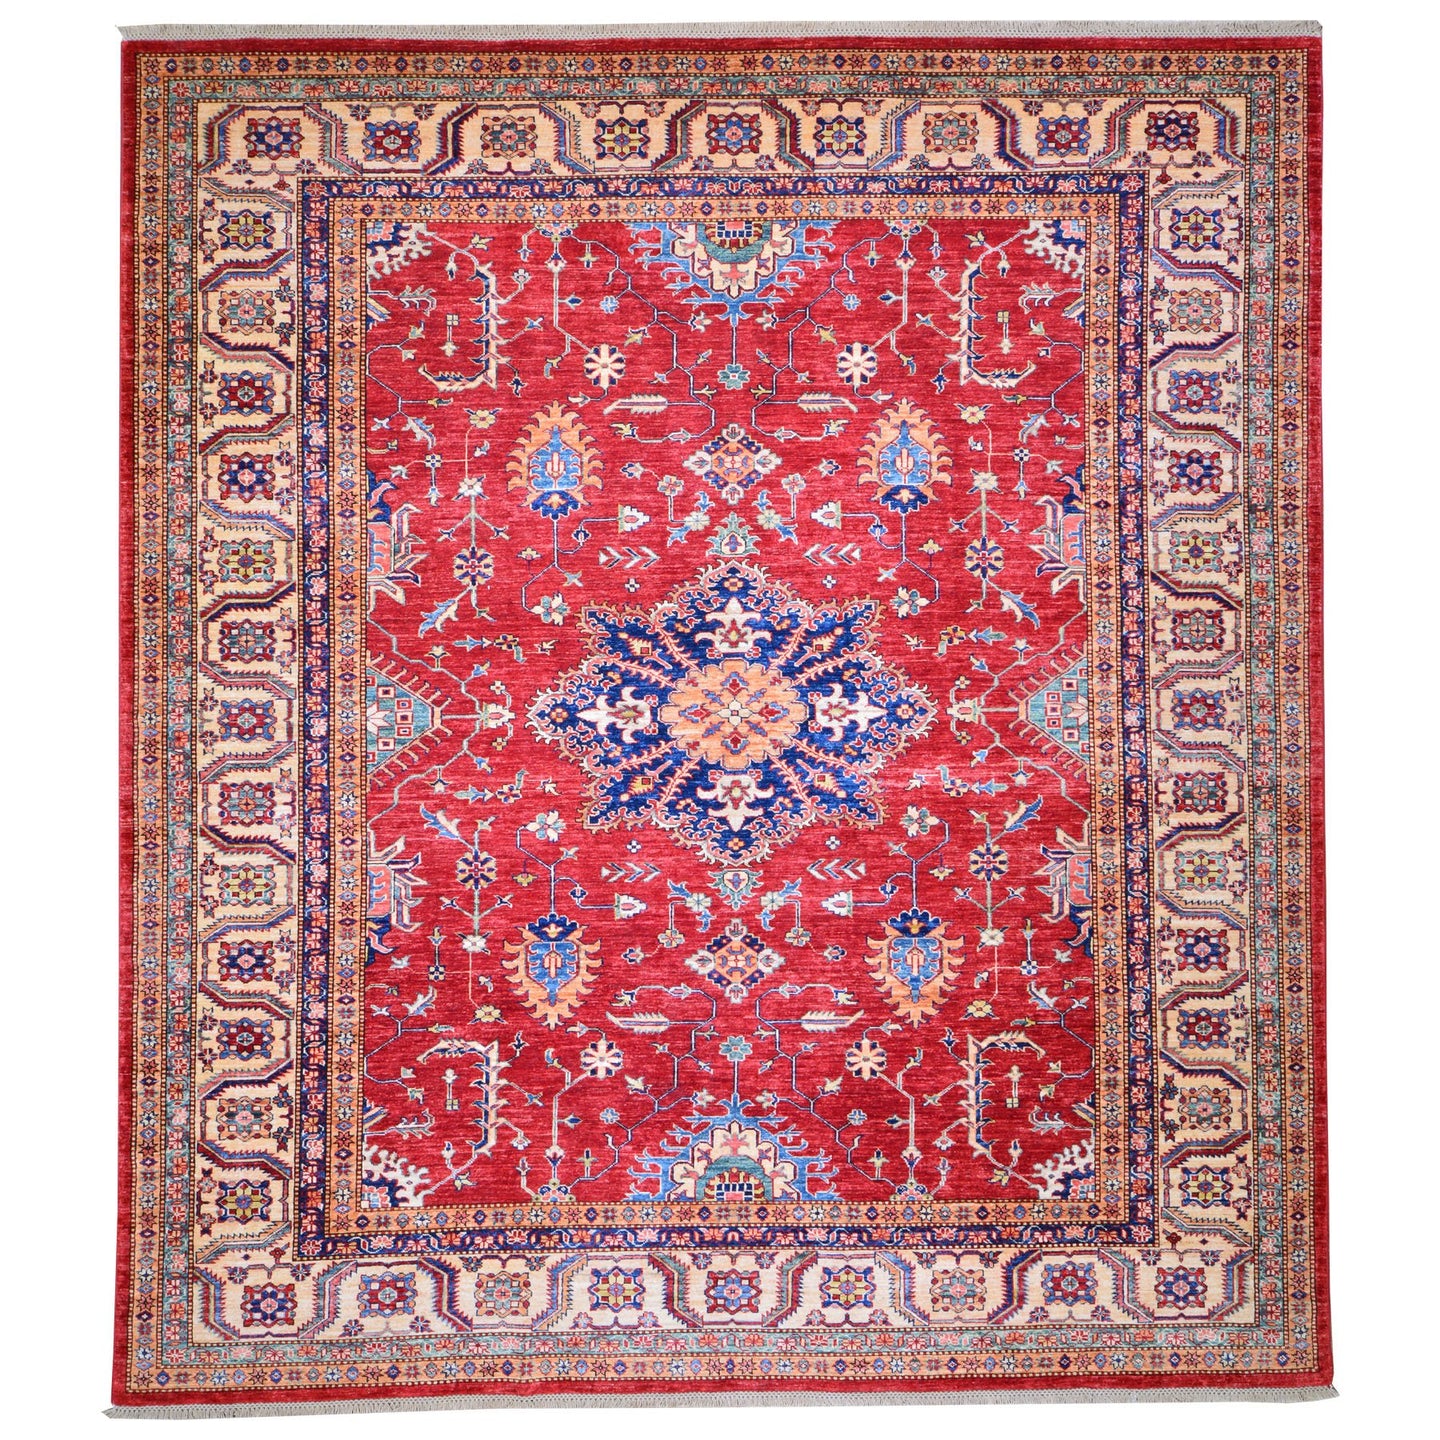 Oriental rugs, hand-knotted carpets, sustainable rugs, classic world oriental rugs, handmade, United States, interior design,  Brrsf-837